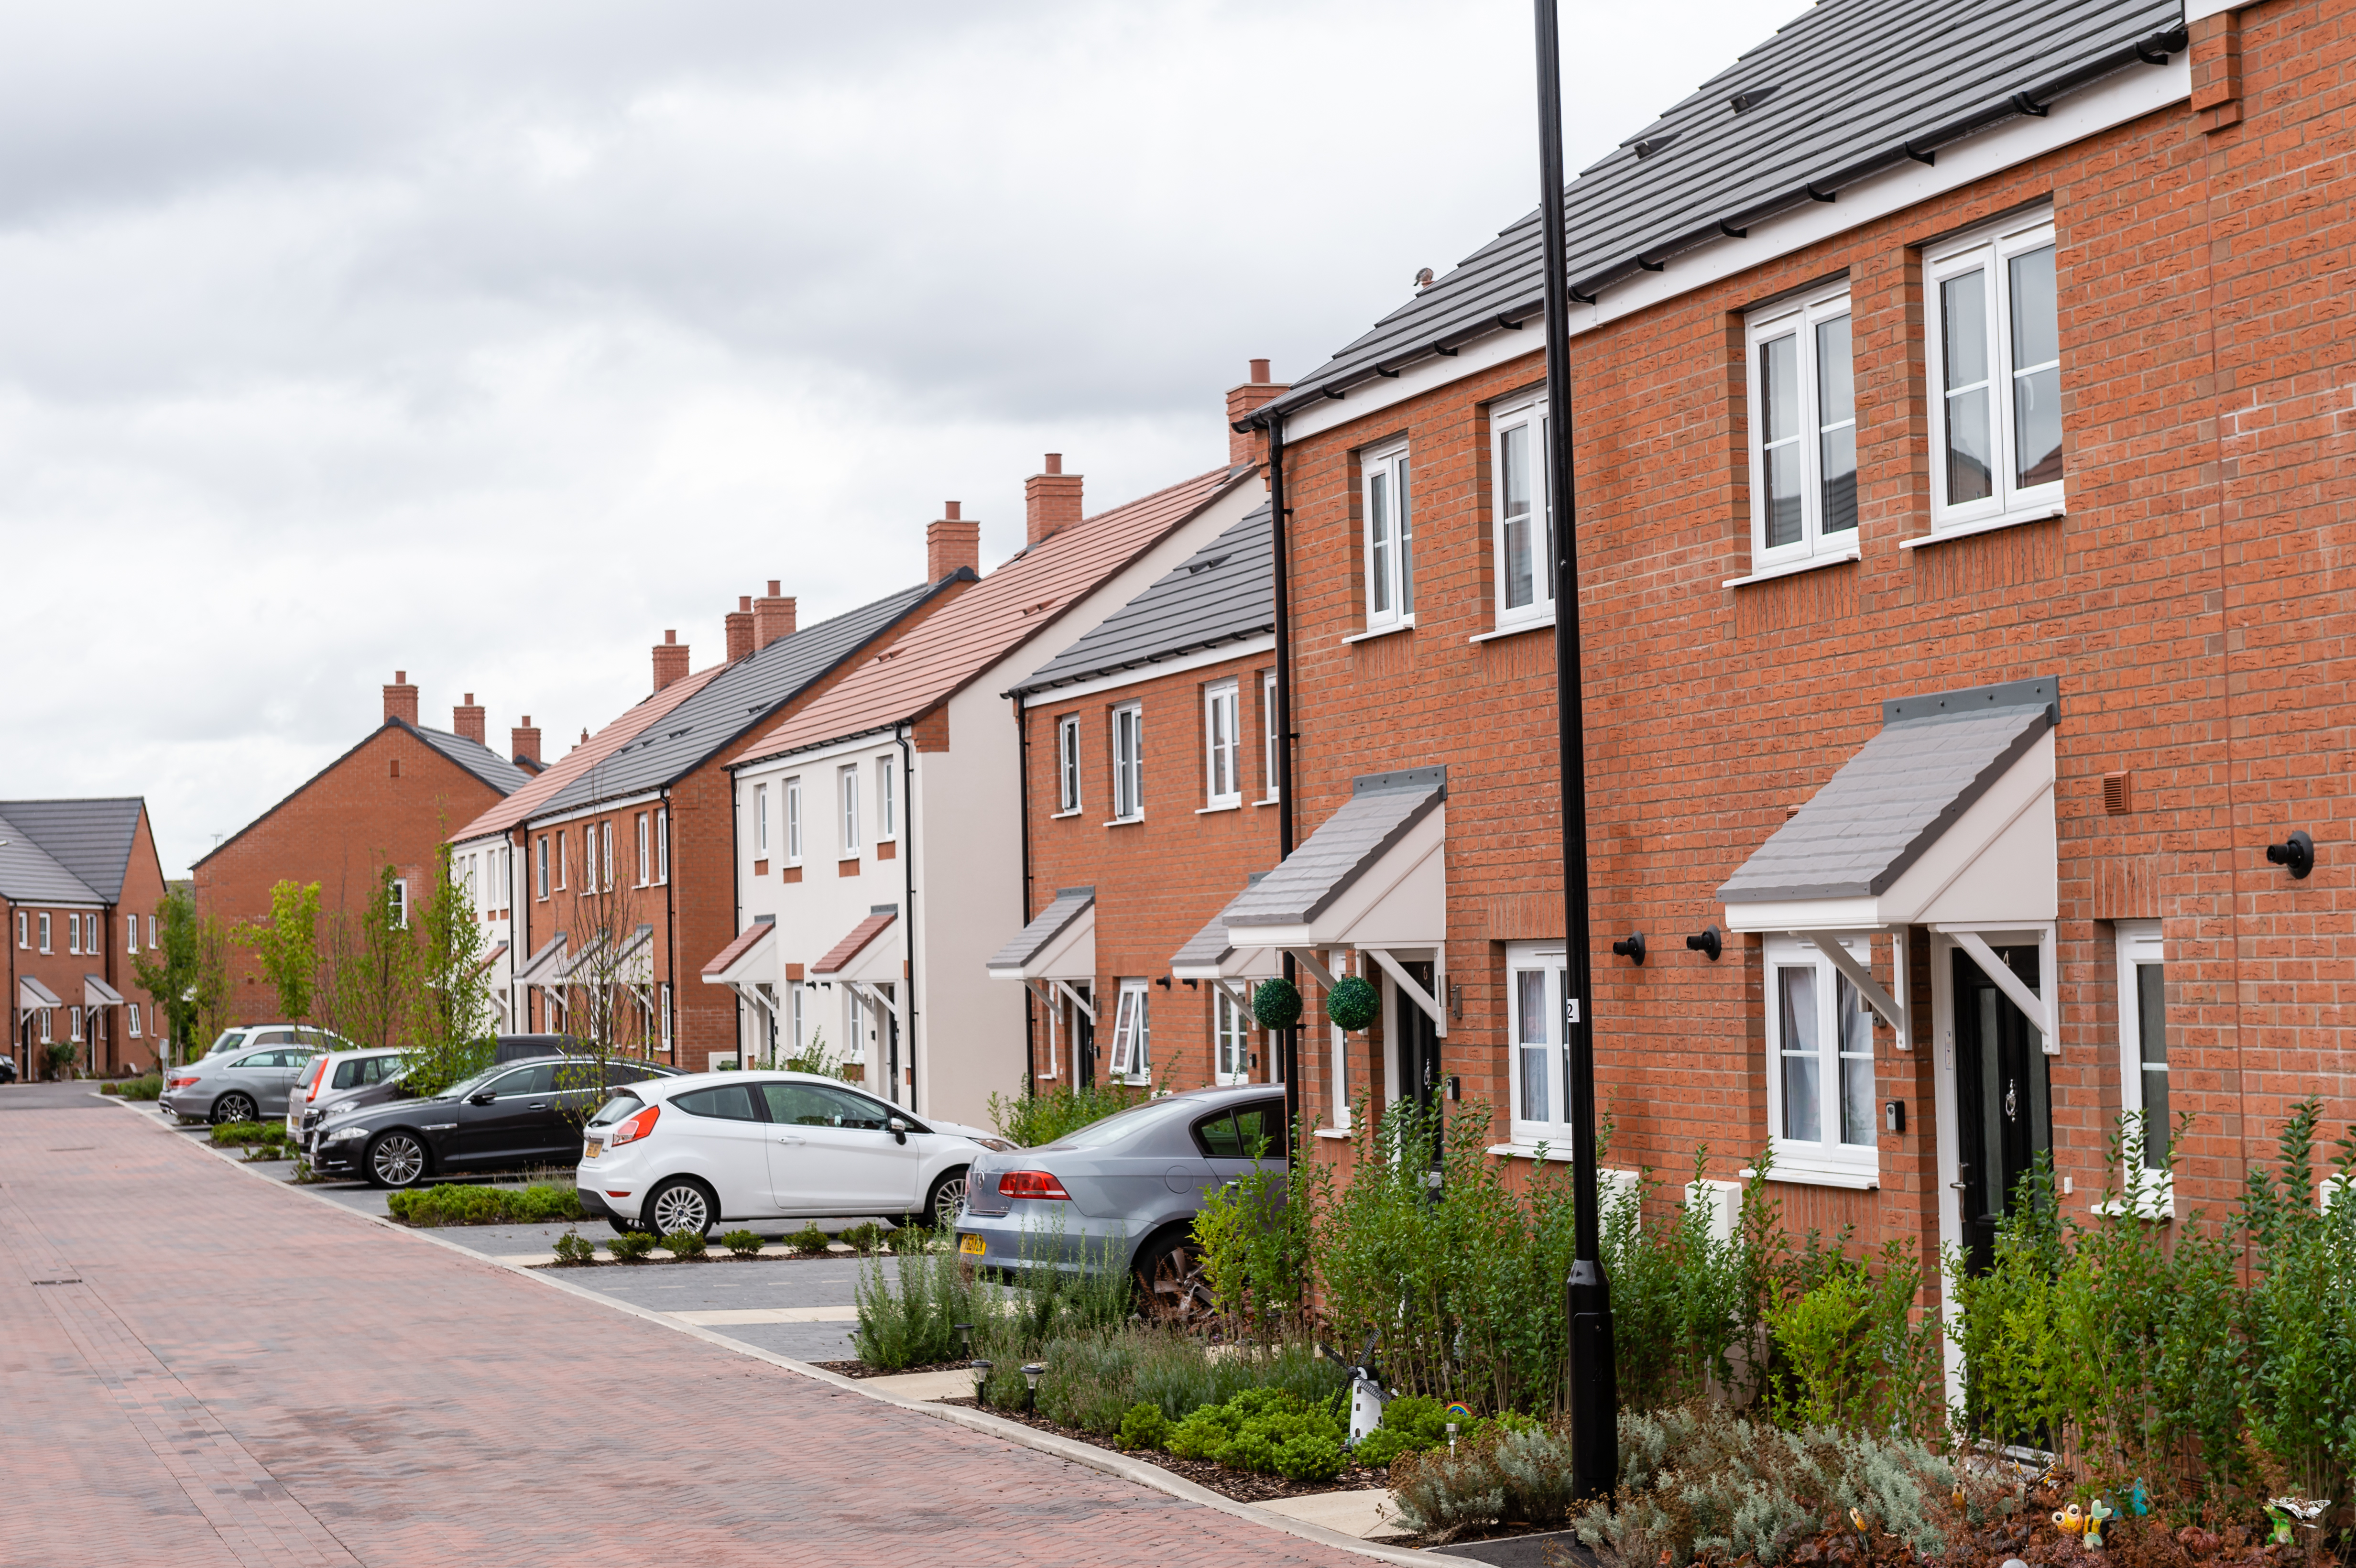 Street shot of a row of terraced new-build houses with cars parked outside